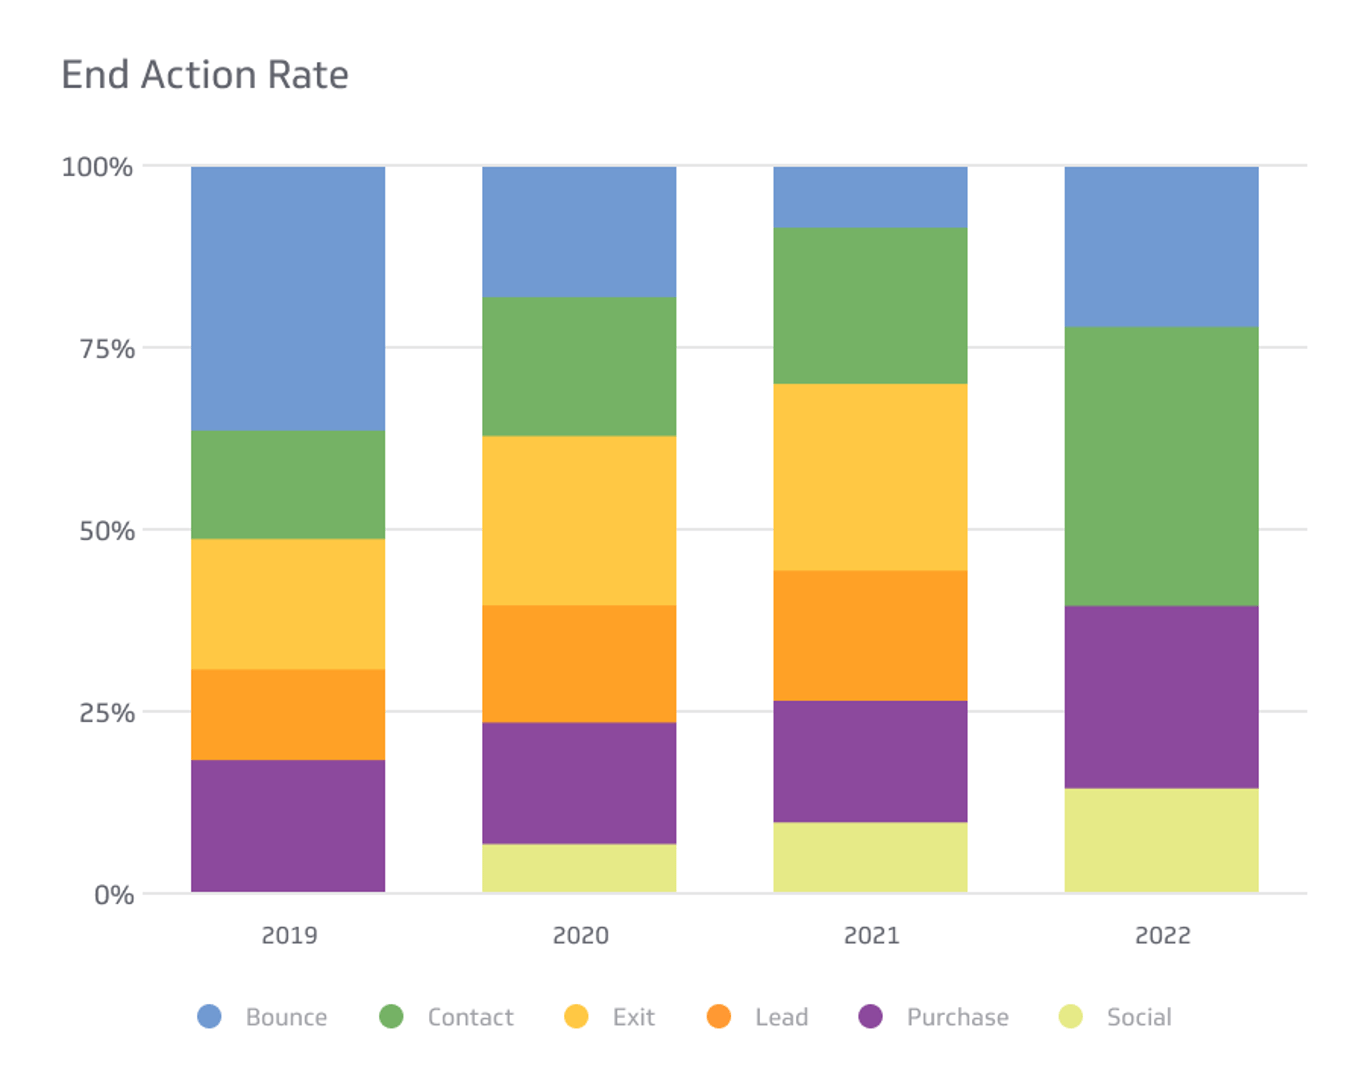 Related KPI Examples - End Action Rate Metric